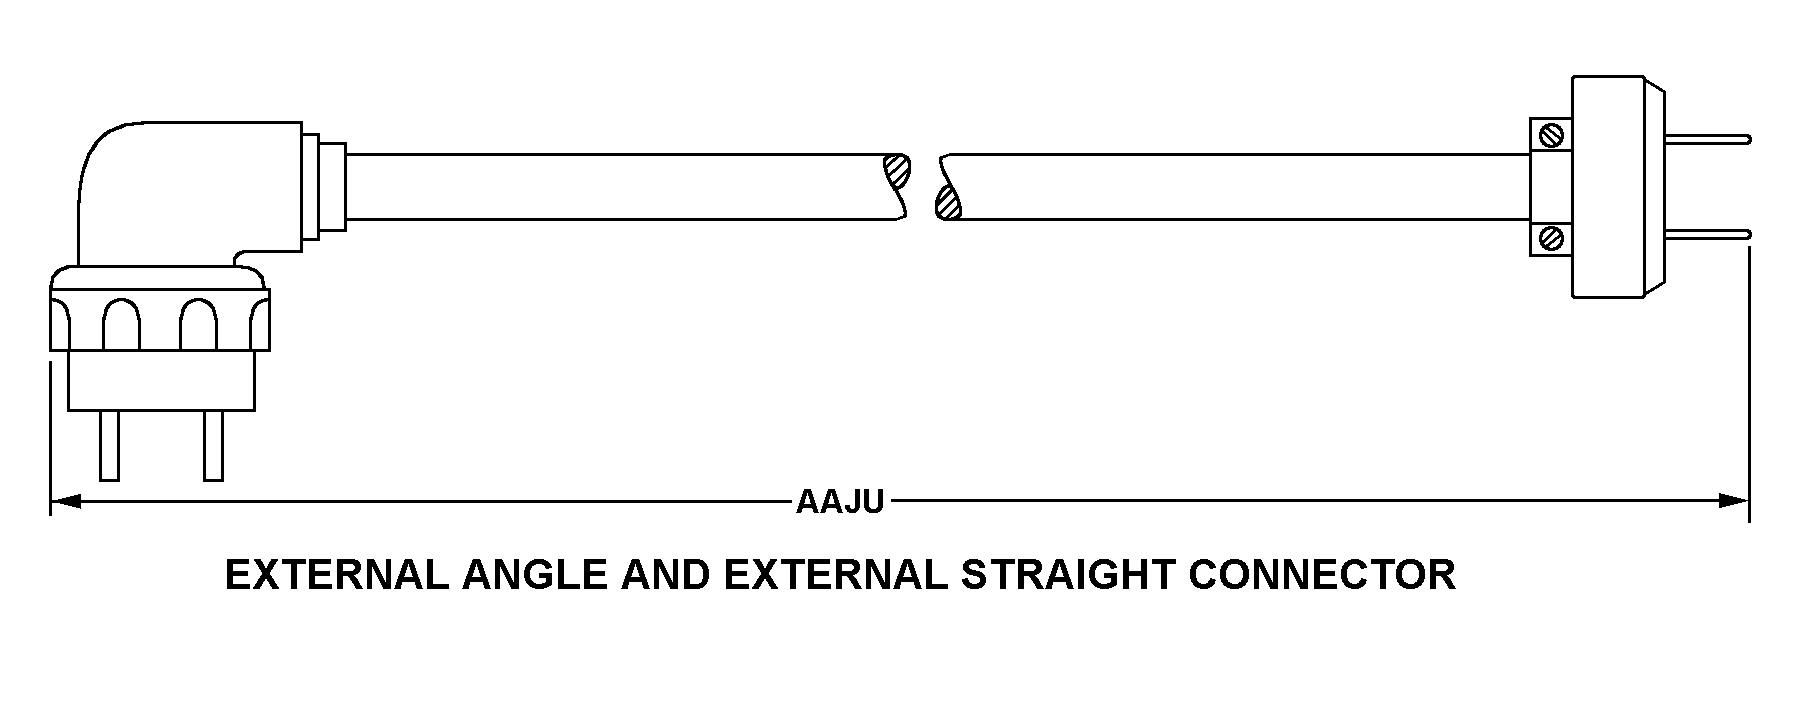 EXTERNAL ANGLE AND EXTERNAL STRAIGHT CONNECTOR style nsn 6150-01-494-5707